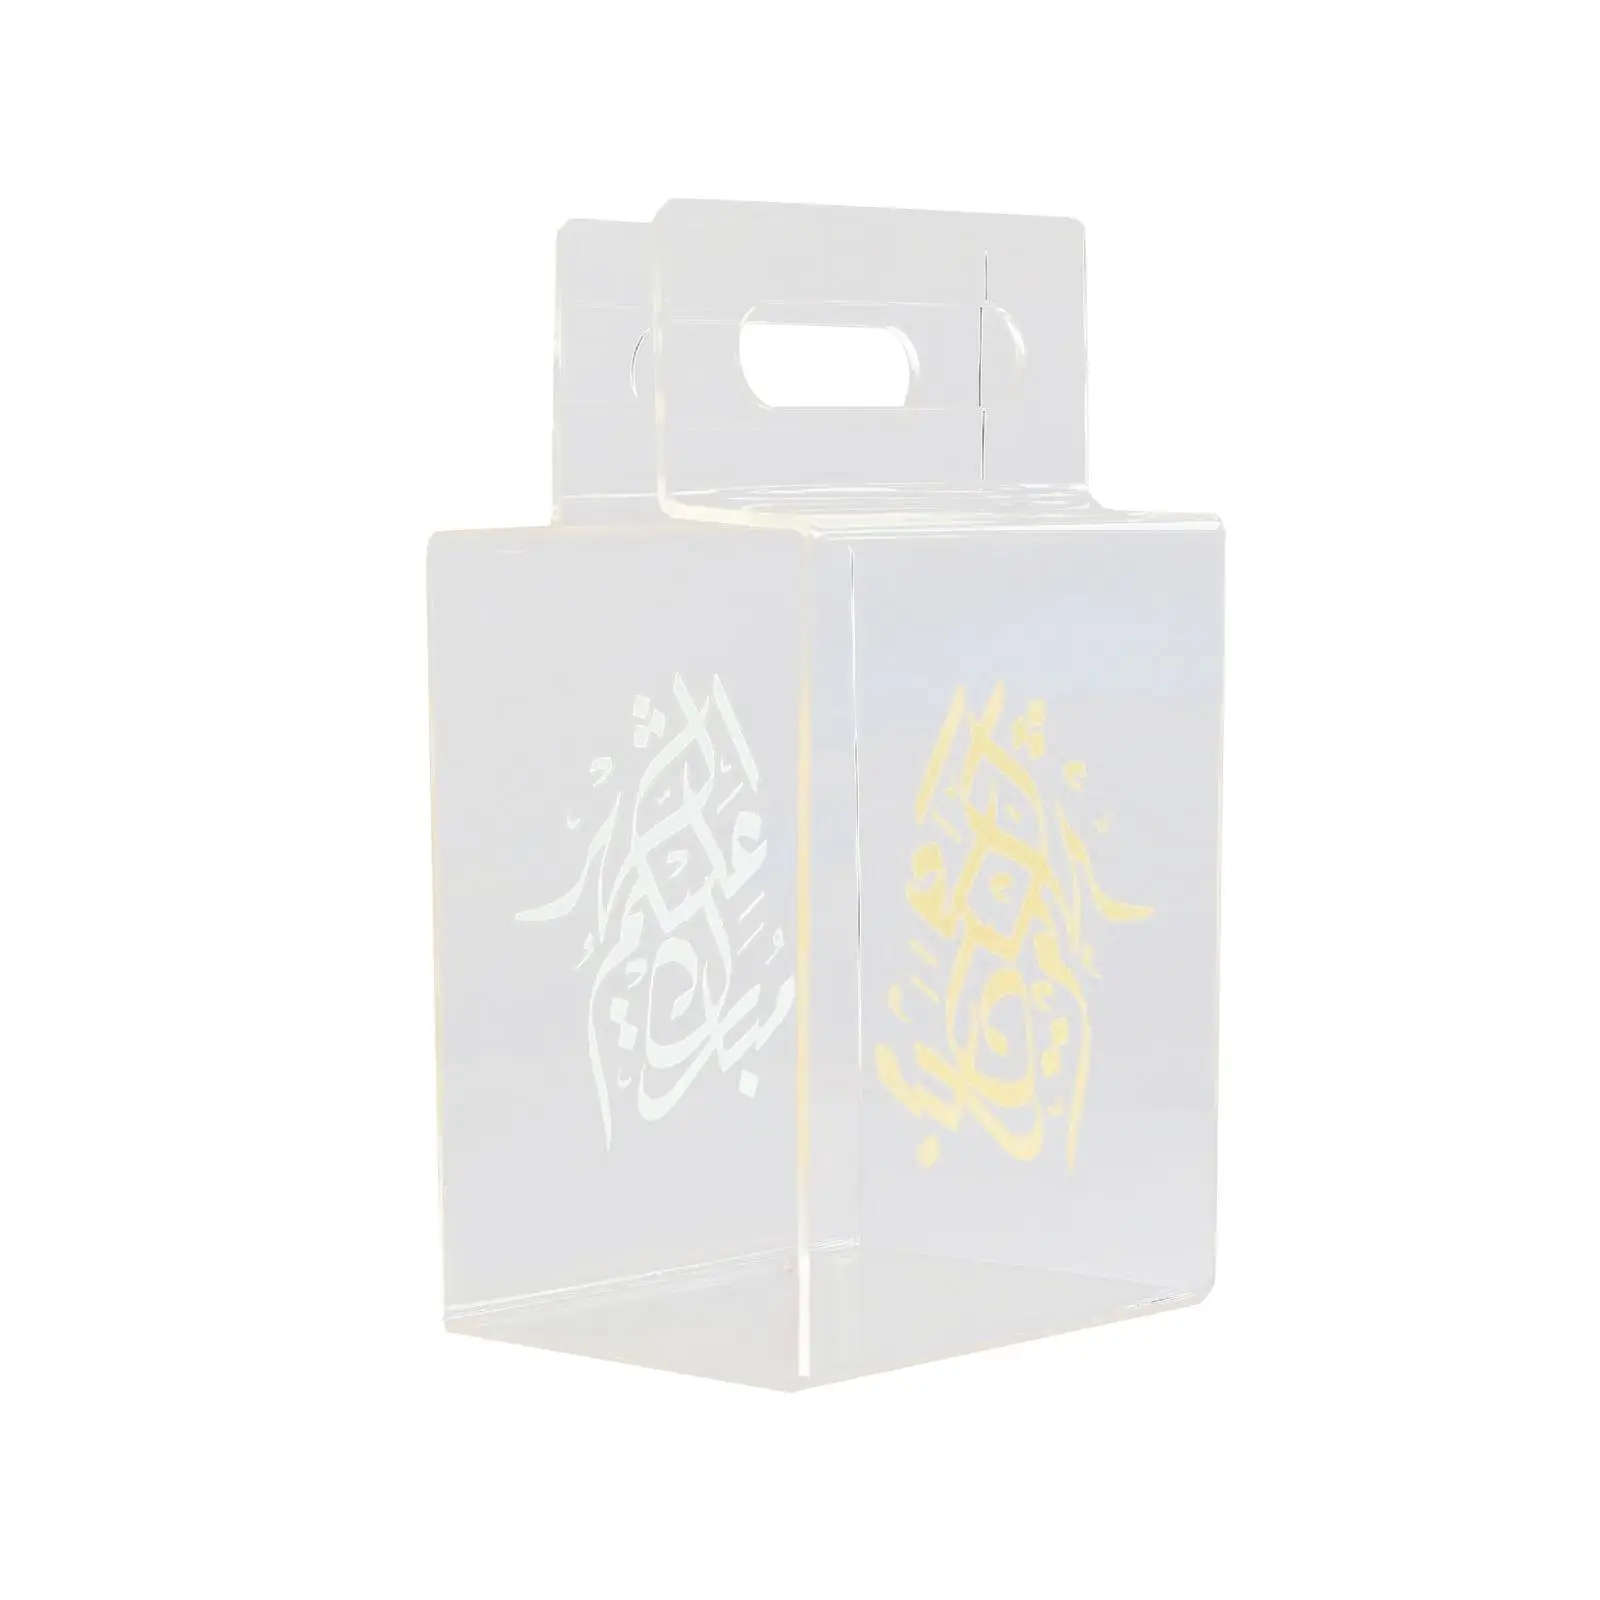 Wedding Favour Boxes Candy Treat Gift Box Snack Boxes Clear Gift Boxes for Gift Box Weddings Birthdays Holiday Parties